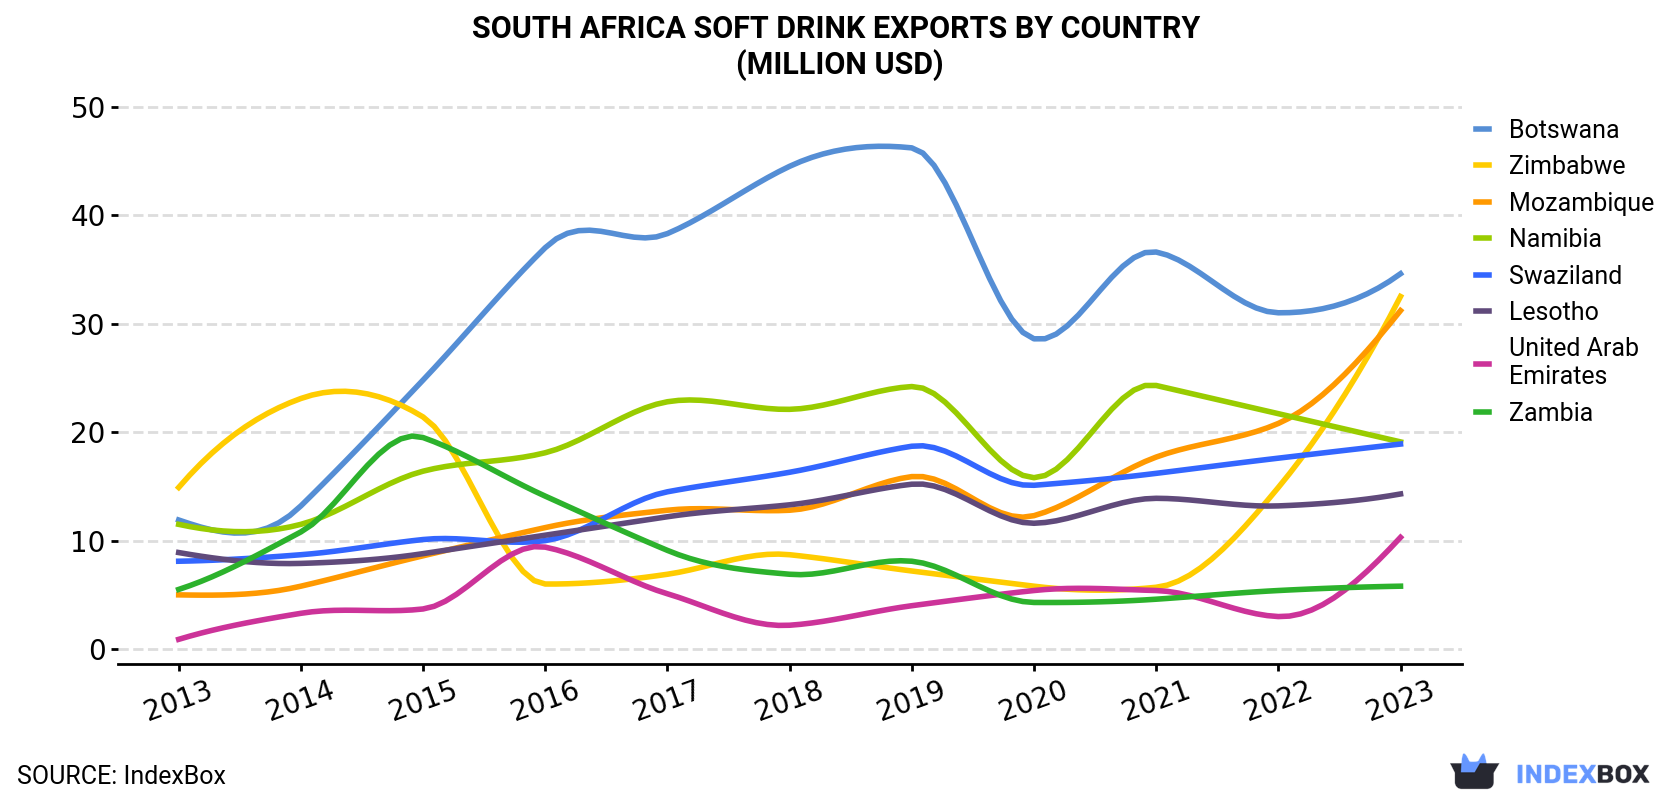 South Africa Soft Drink Exports By Country (Million USD)